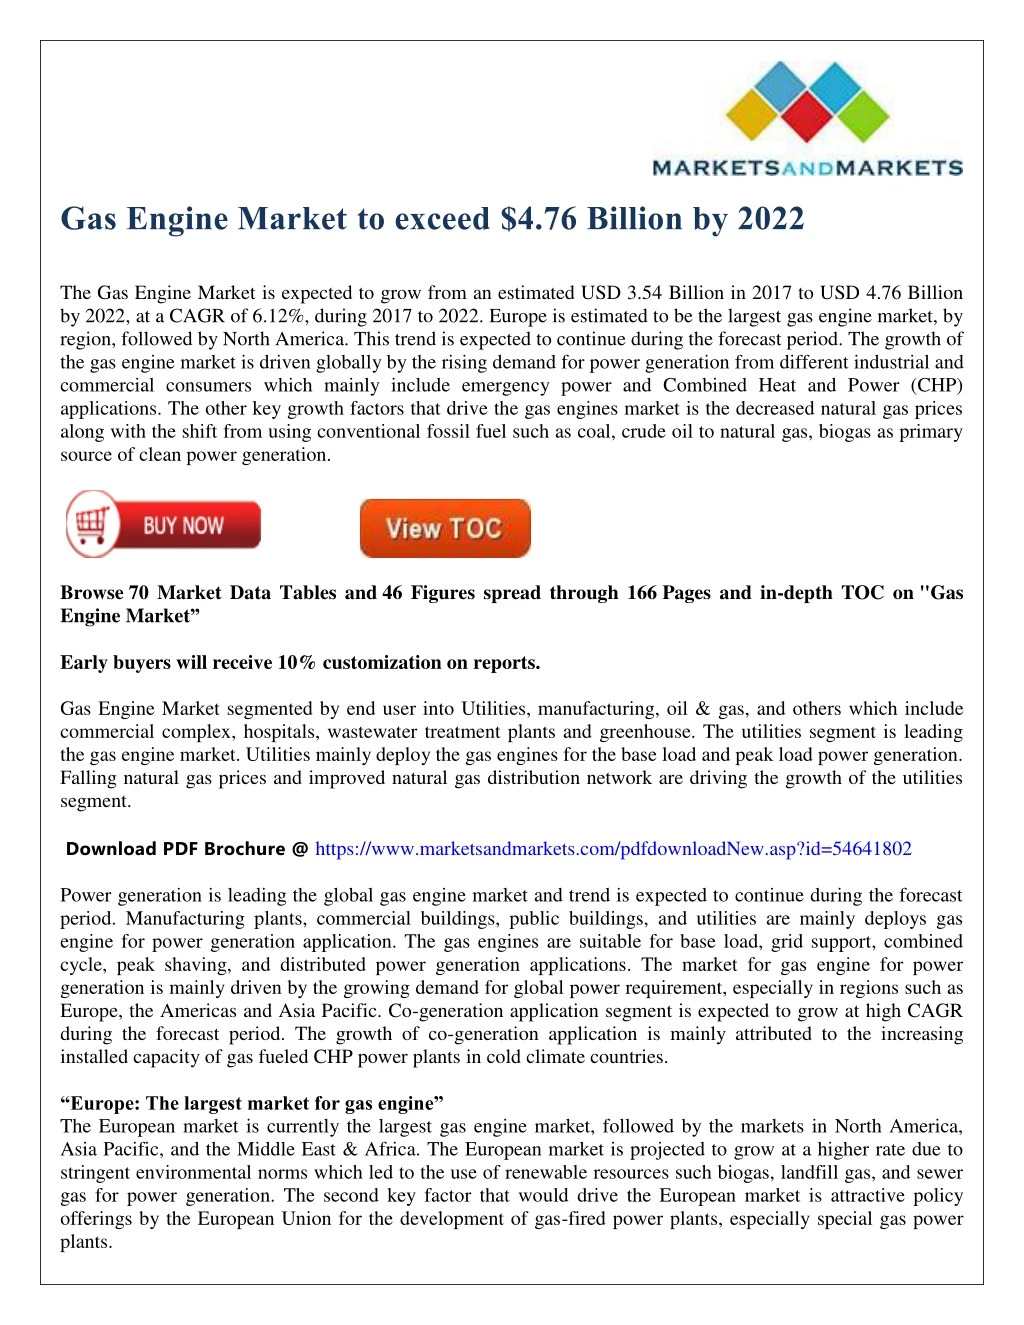 gas engine market to exceed 4 76 billion by 2022